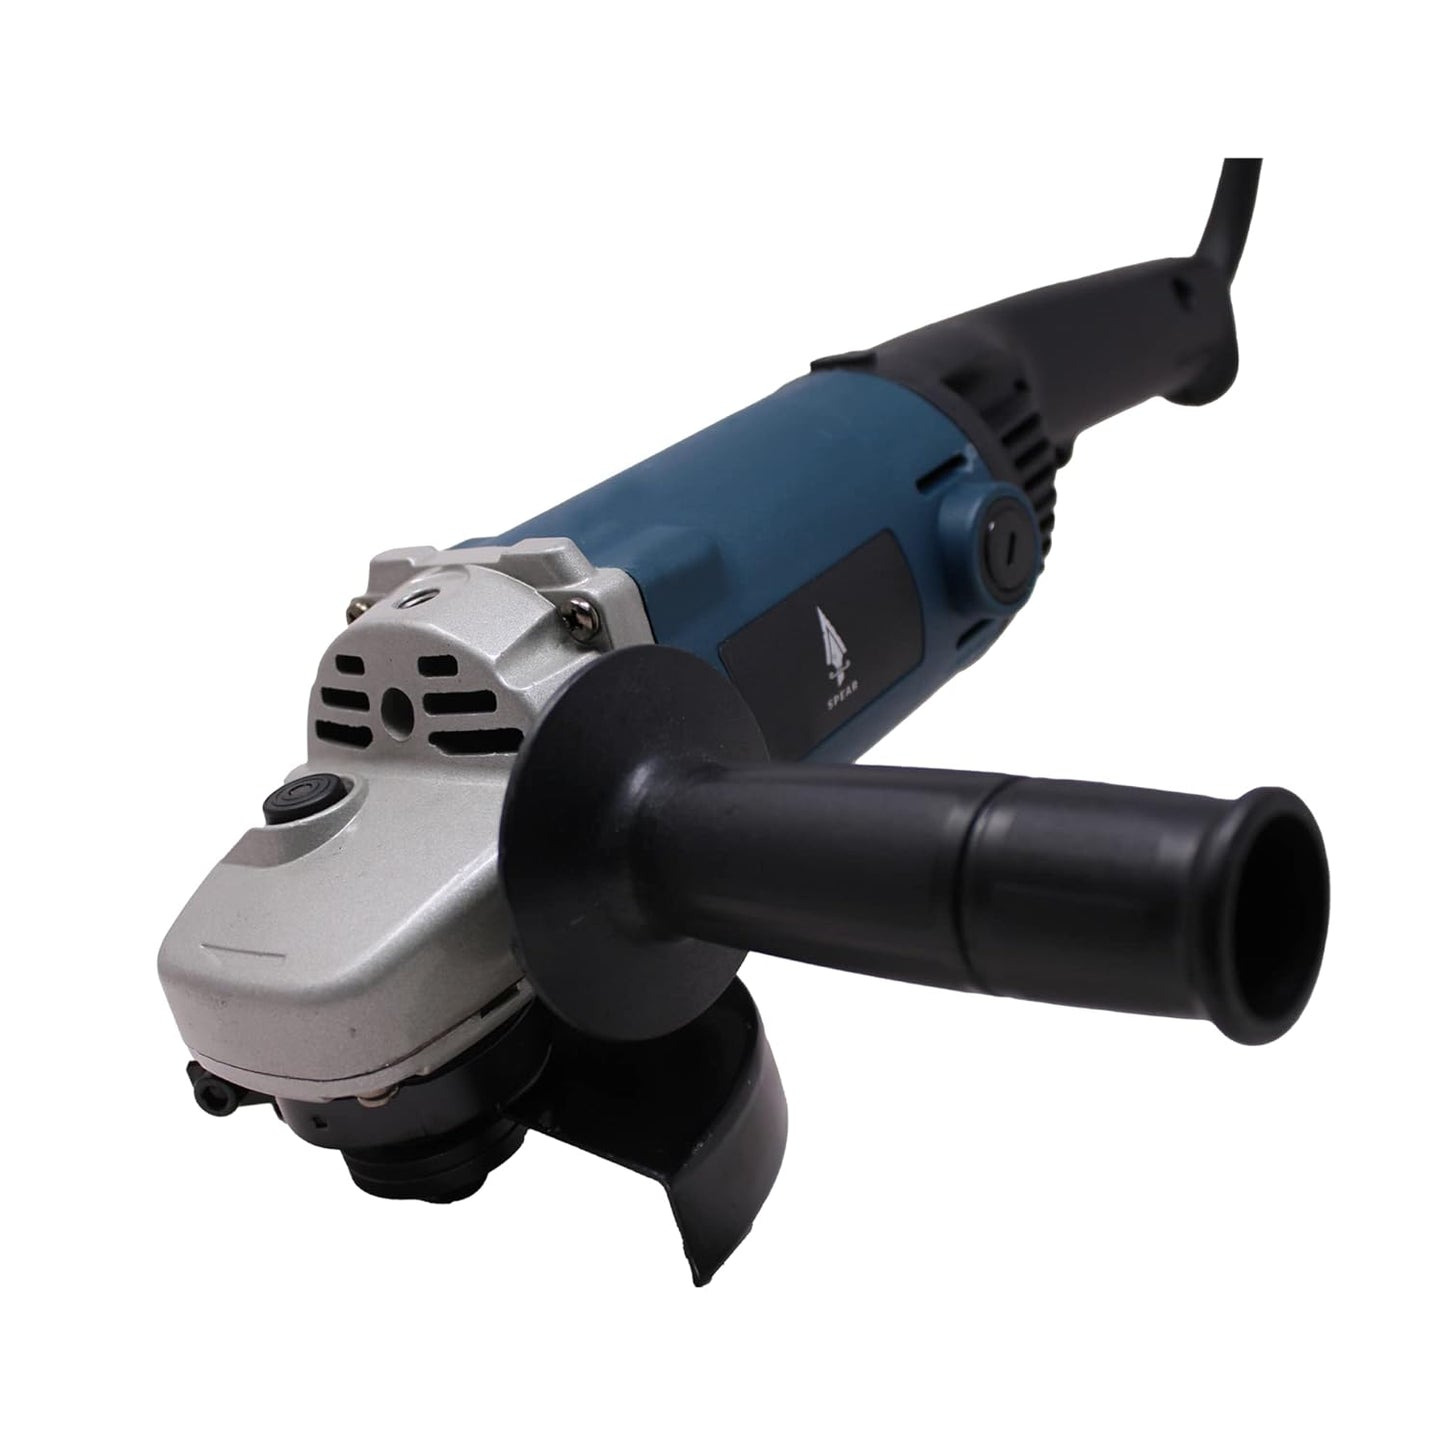 SPEAR SP-AG125 Heavy-Duty Angle Grinder for Grinding, Cutting, Sharpening, Polishing, Removing Rust (1200 W, 5 Inch, 9000 rpm)